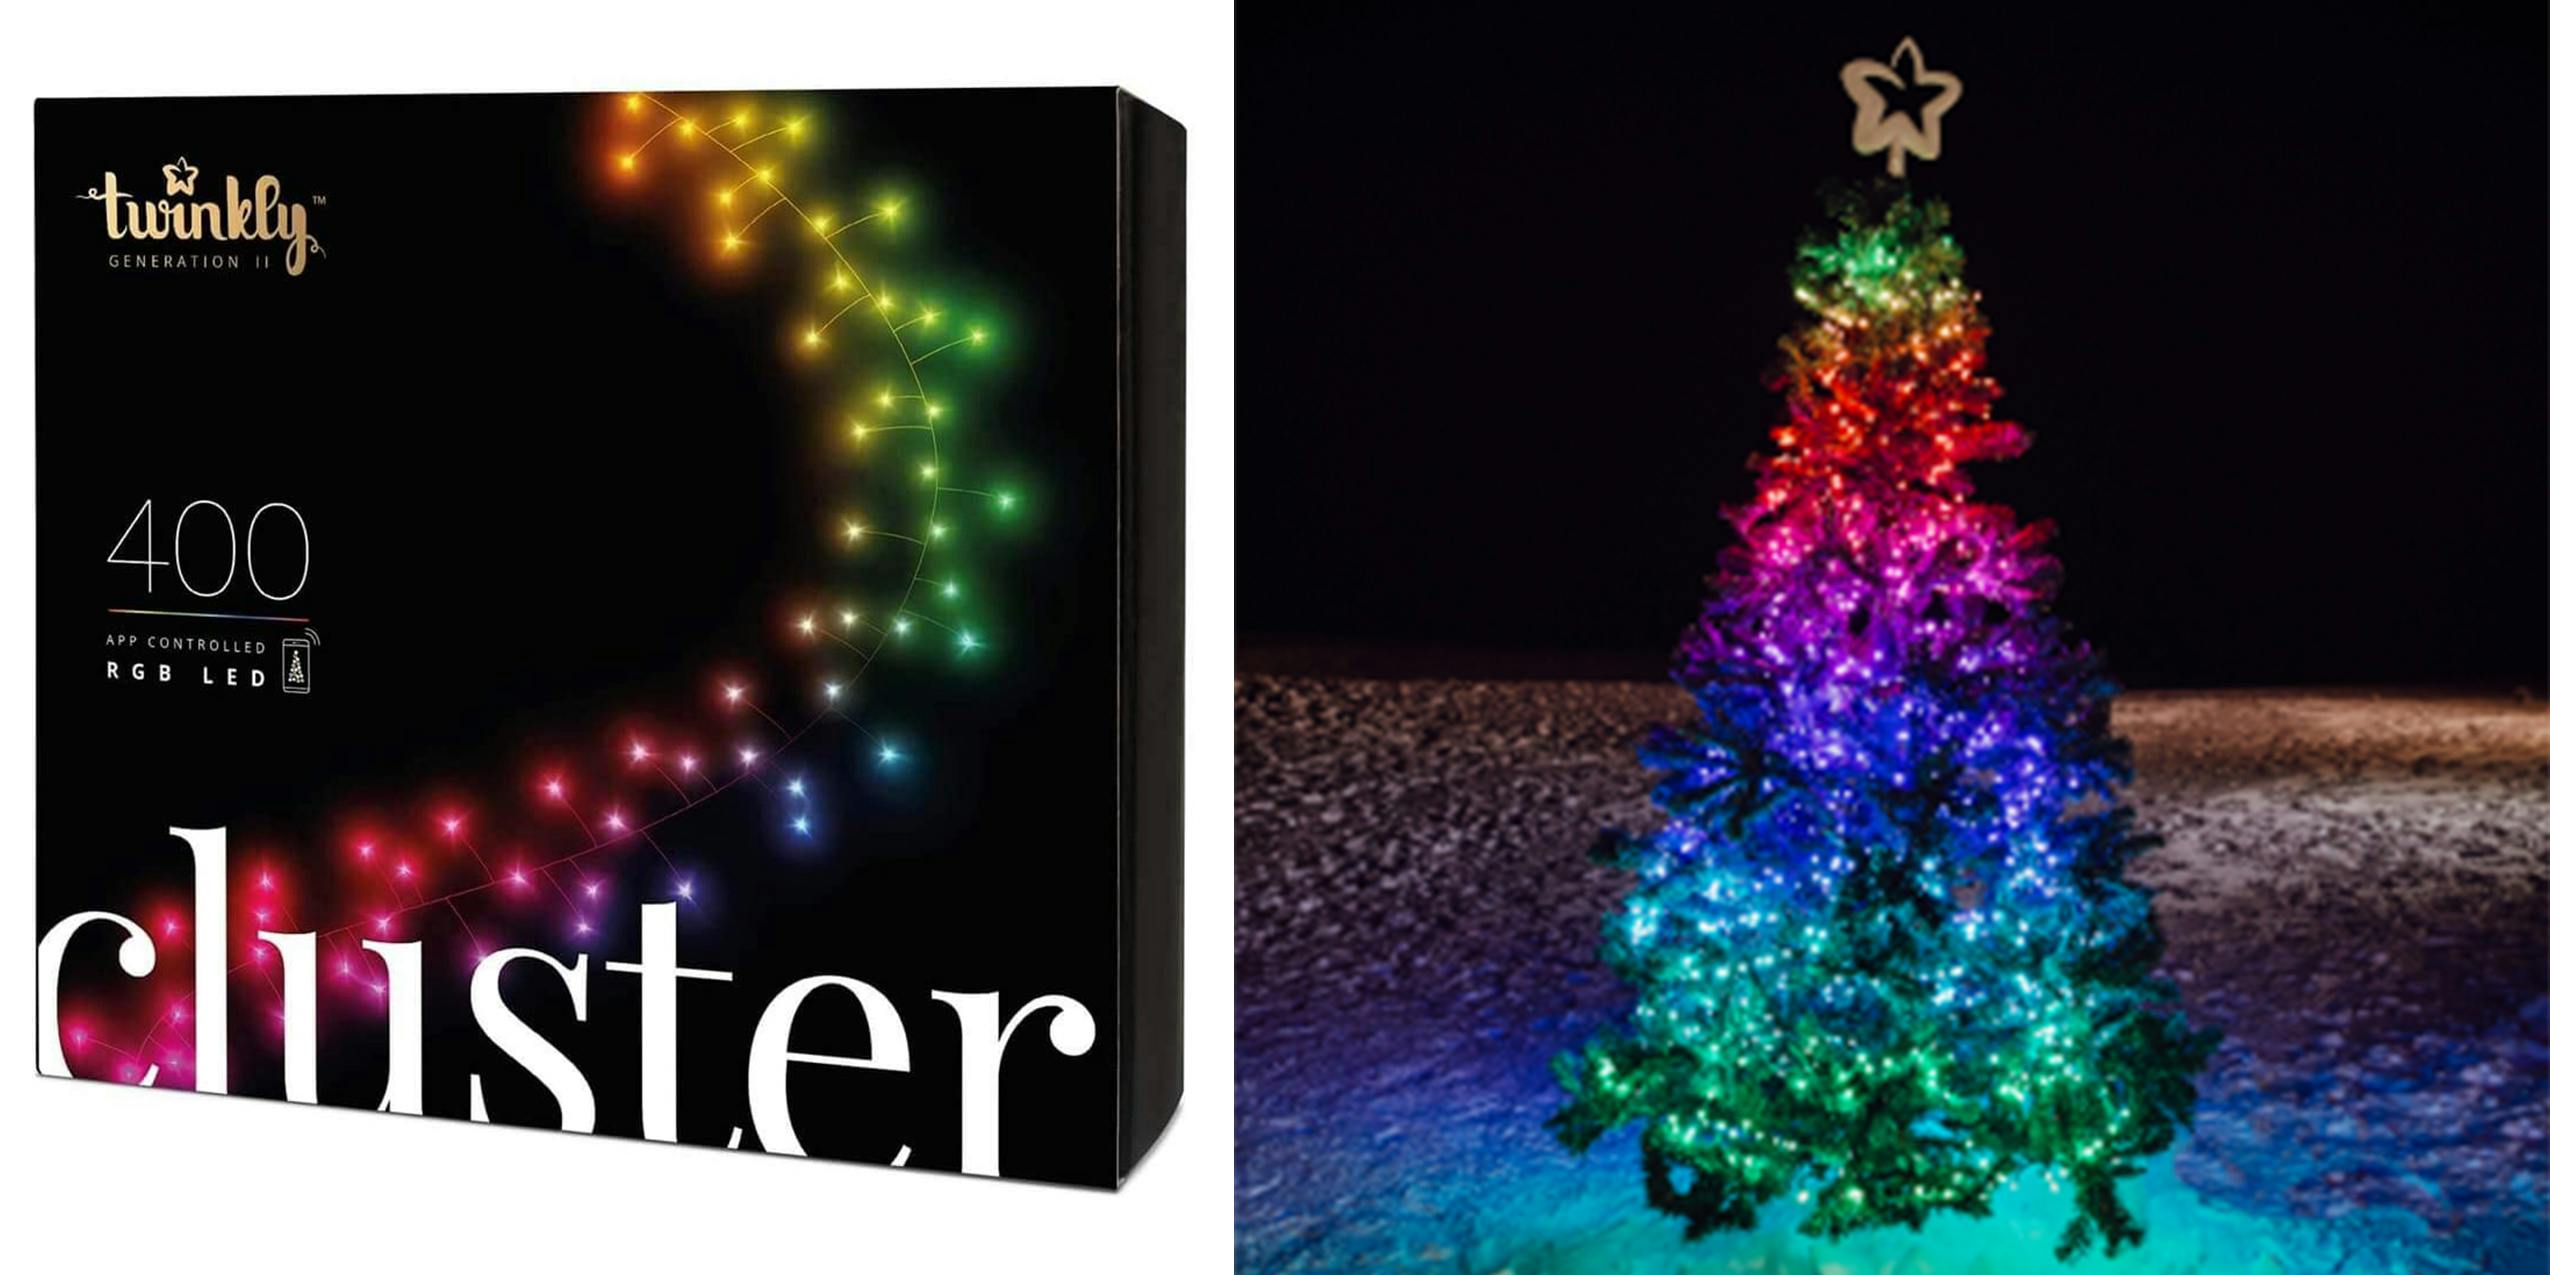 Twinkly Christmas Tree product image and what it looks like on a snowy outdoor location.